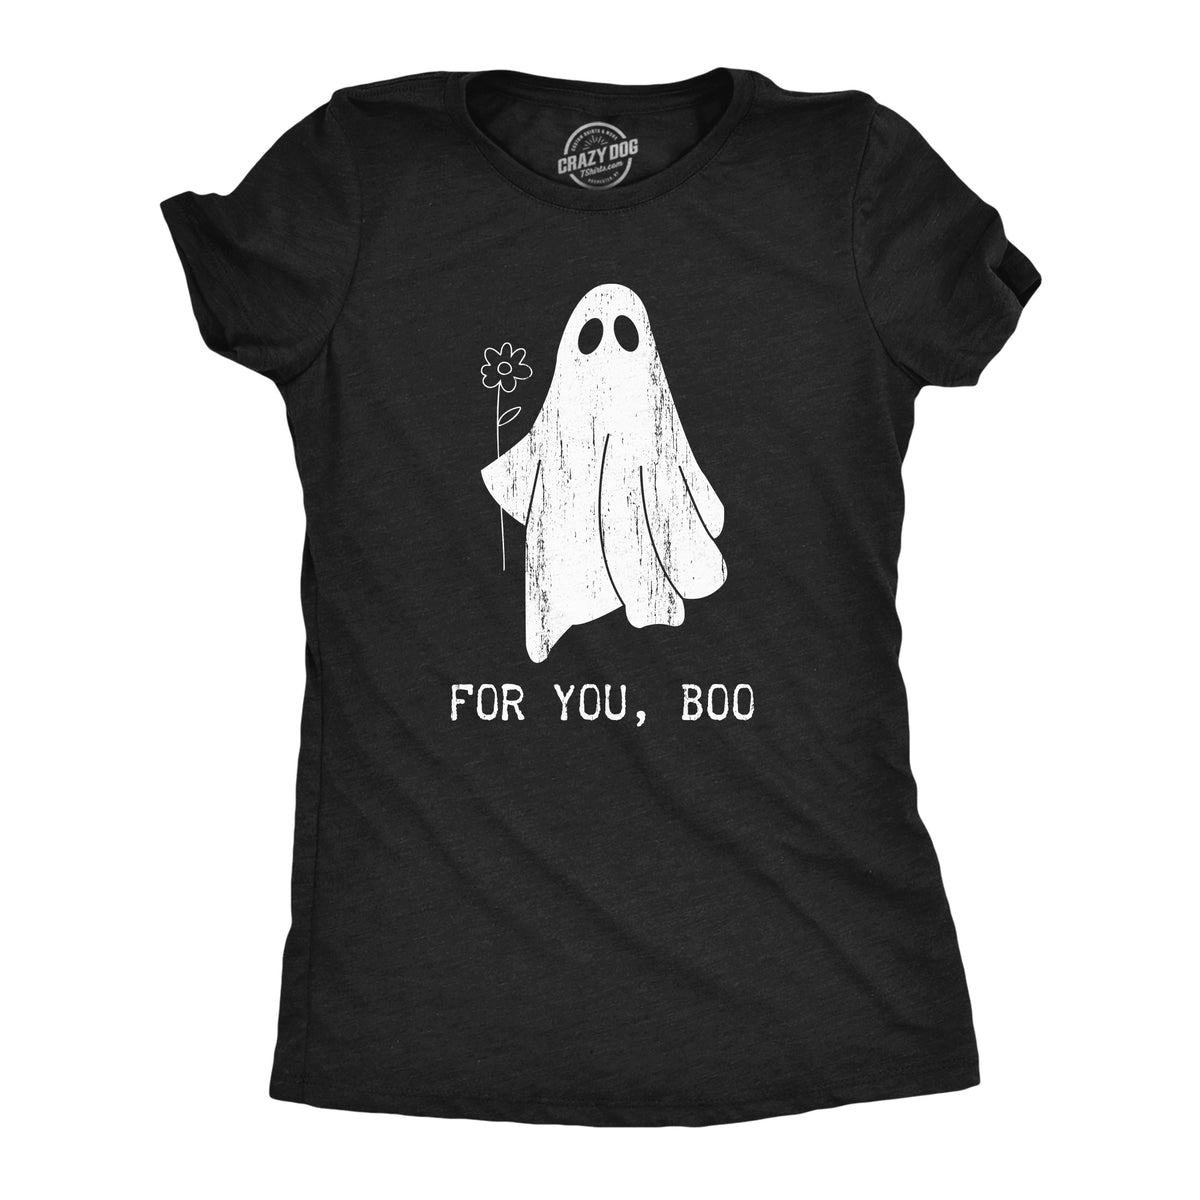 Funny Heather Black - BOO For You Boo Womens T Shirt Nerdy halloween sarcastic Tee